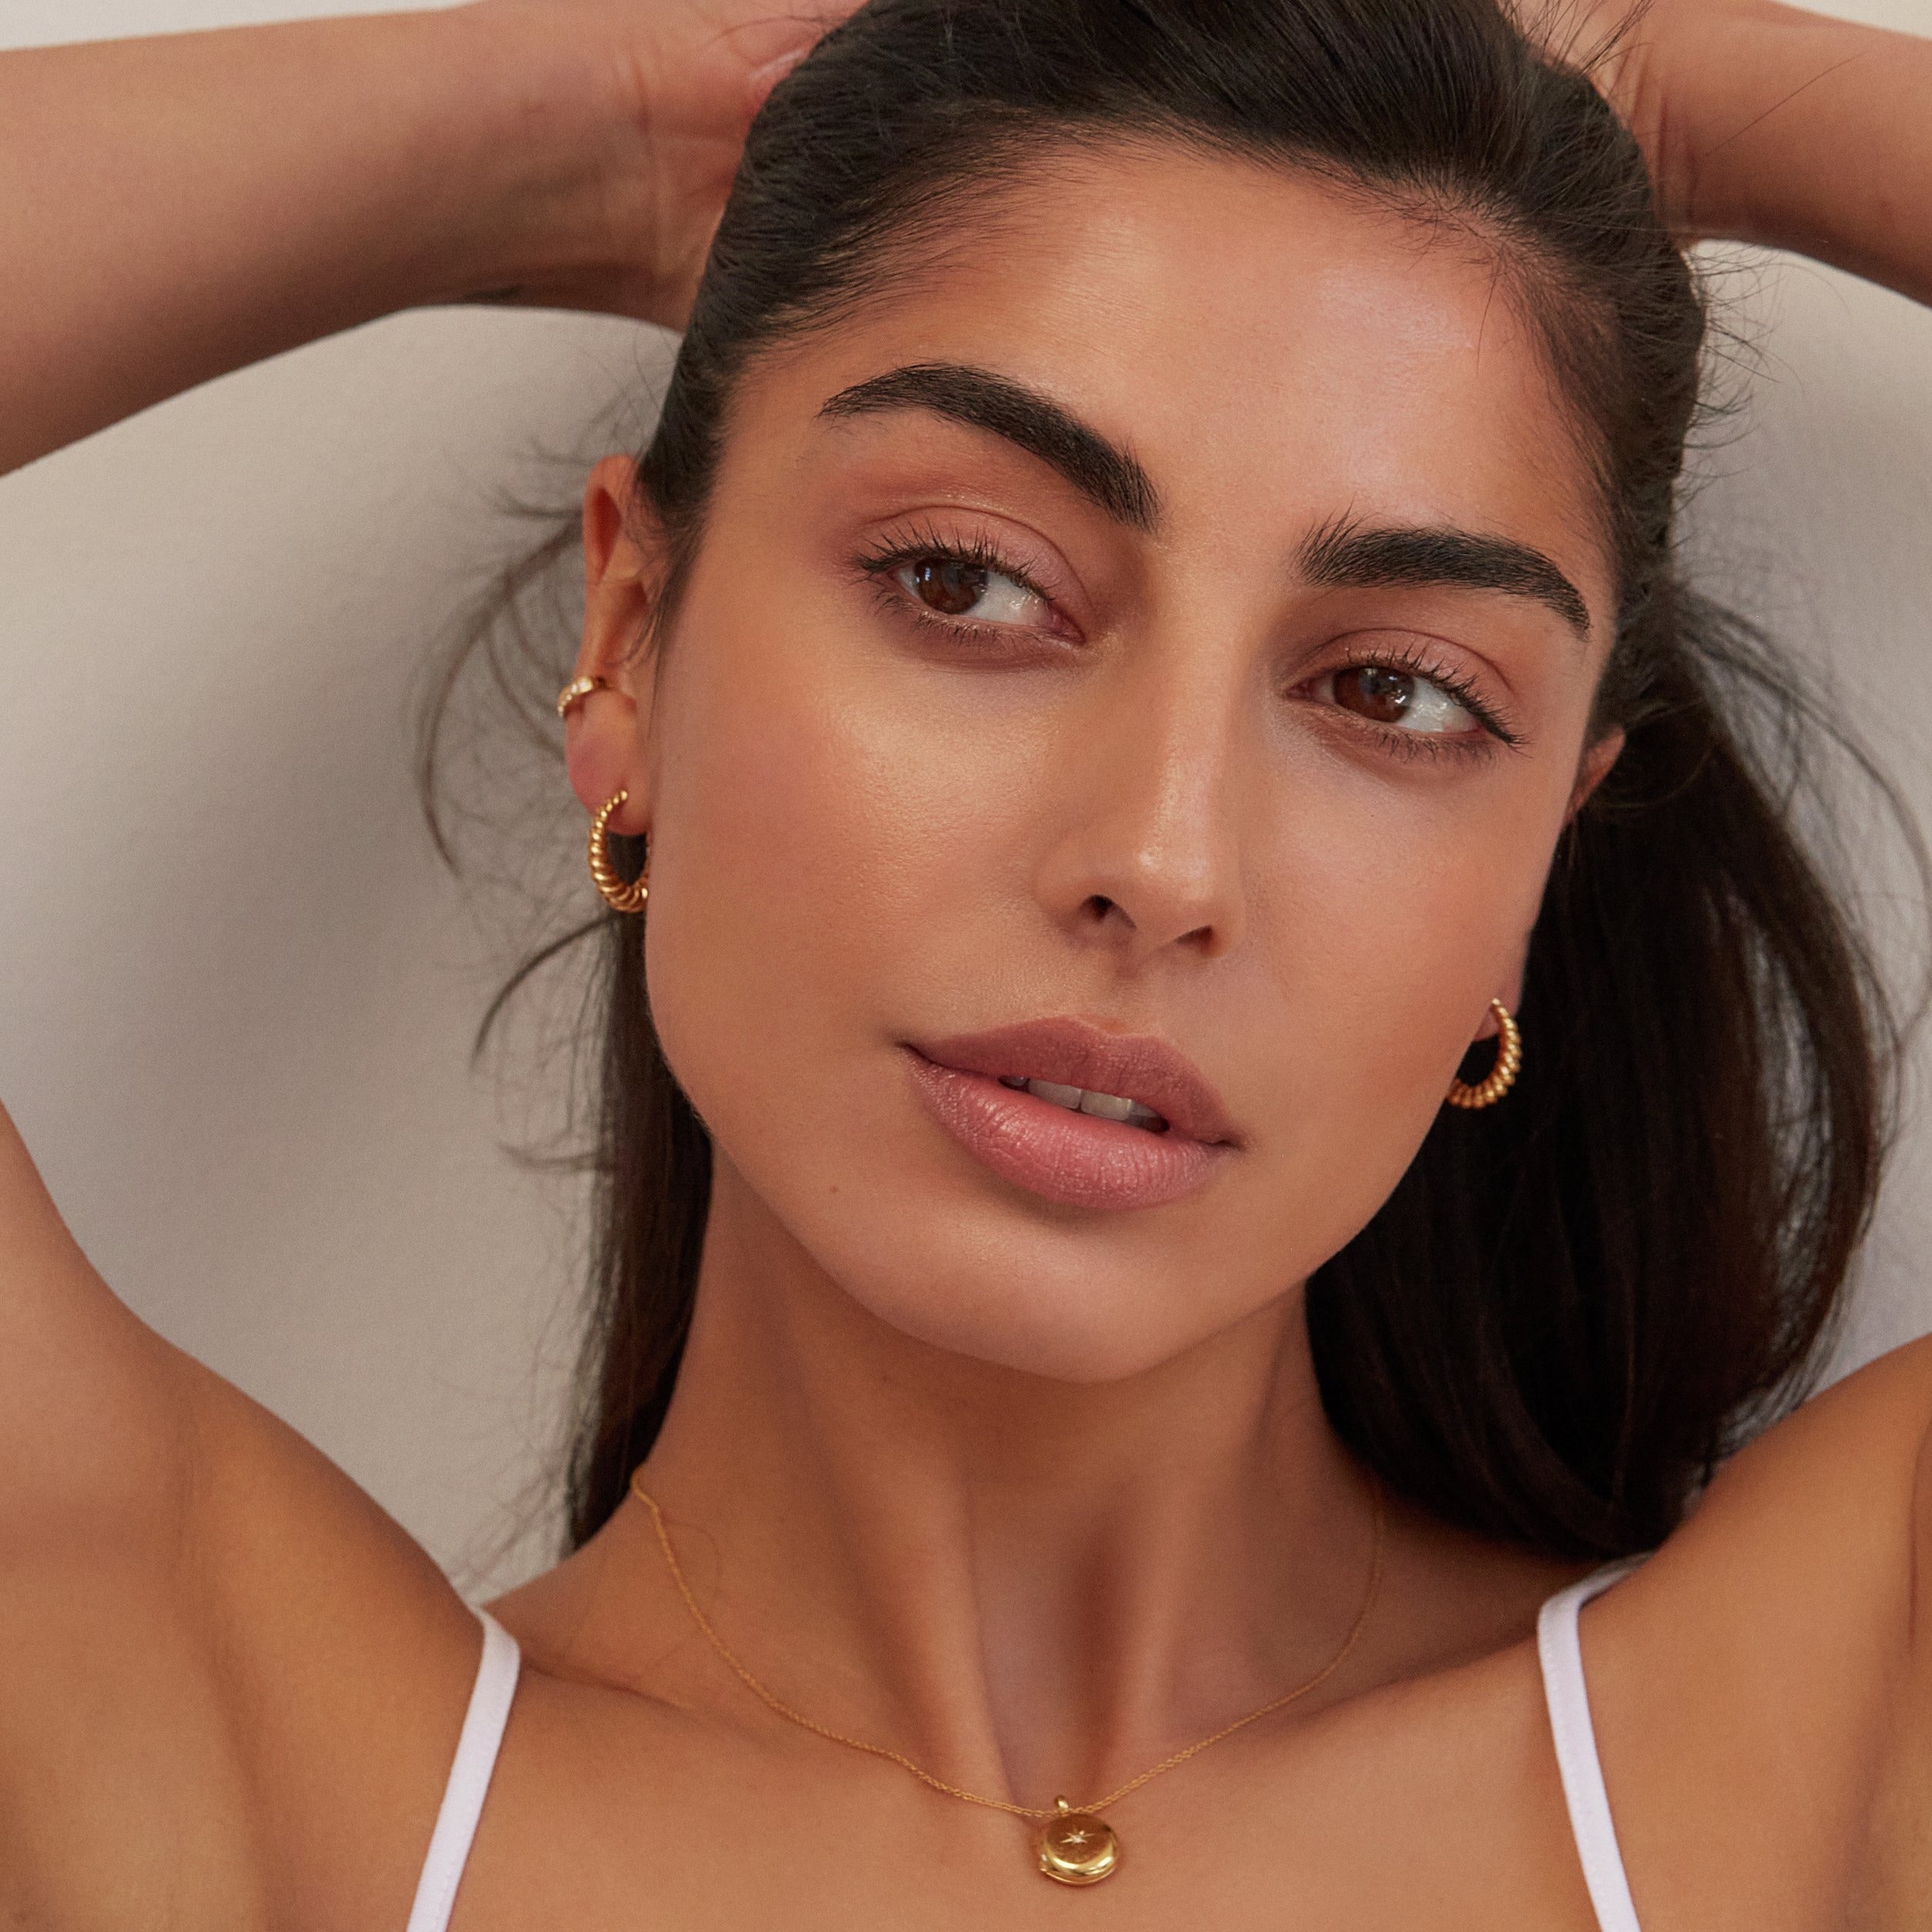 Gold large twisted rope hoop earrings worn by a brunette woman holding her hair tightly back with her hands also wearing a gold locket necklace